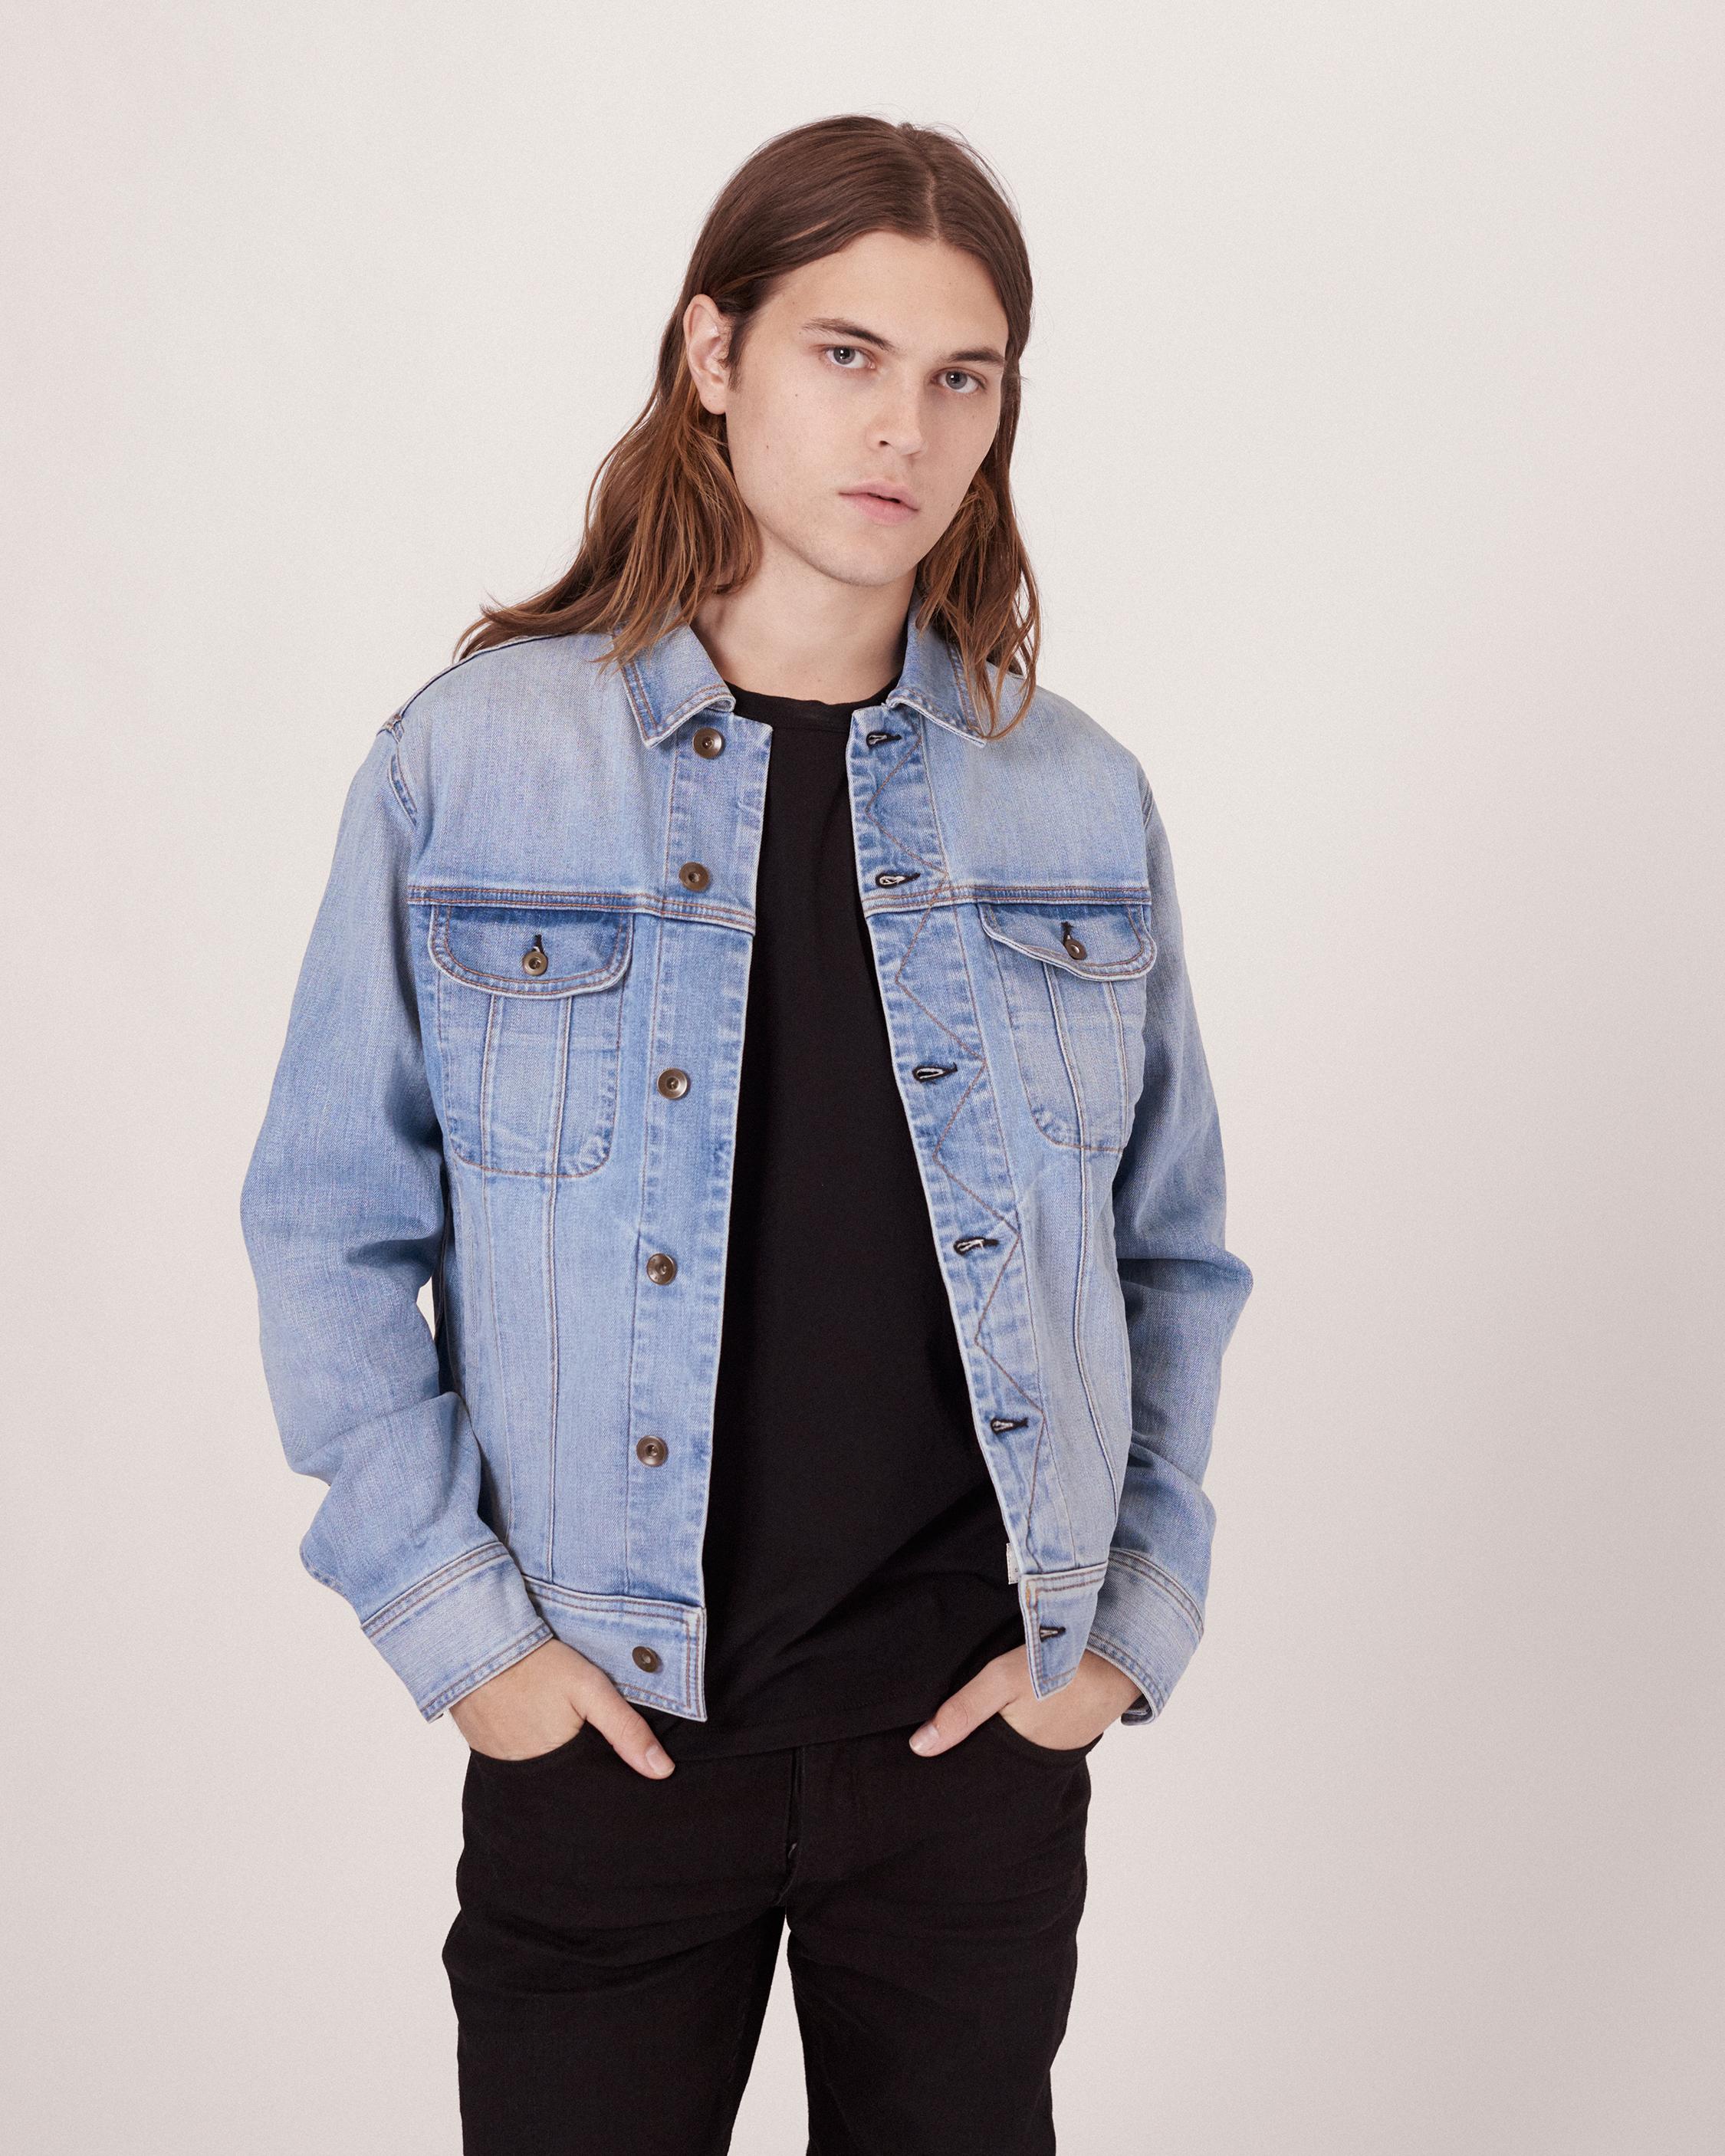 h and m jean jacket mens